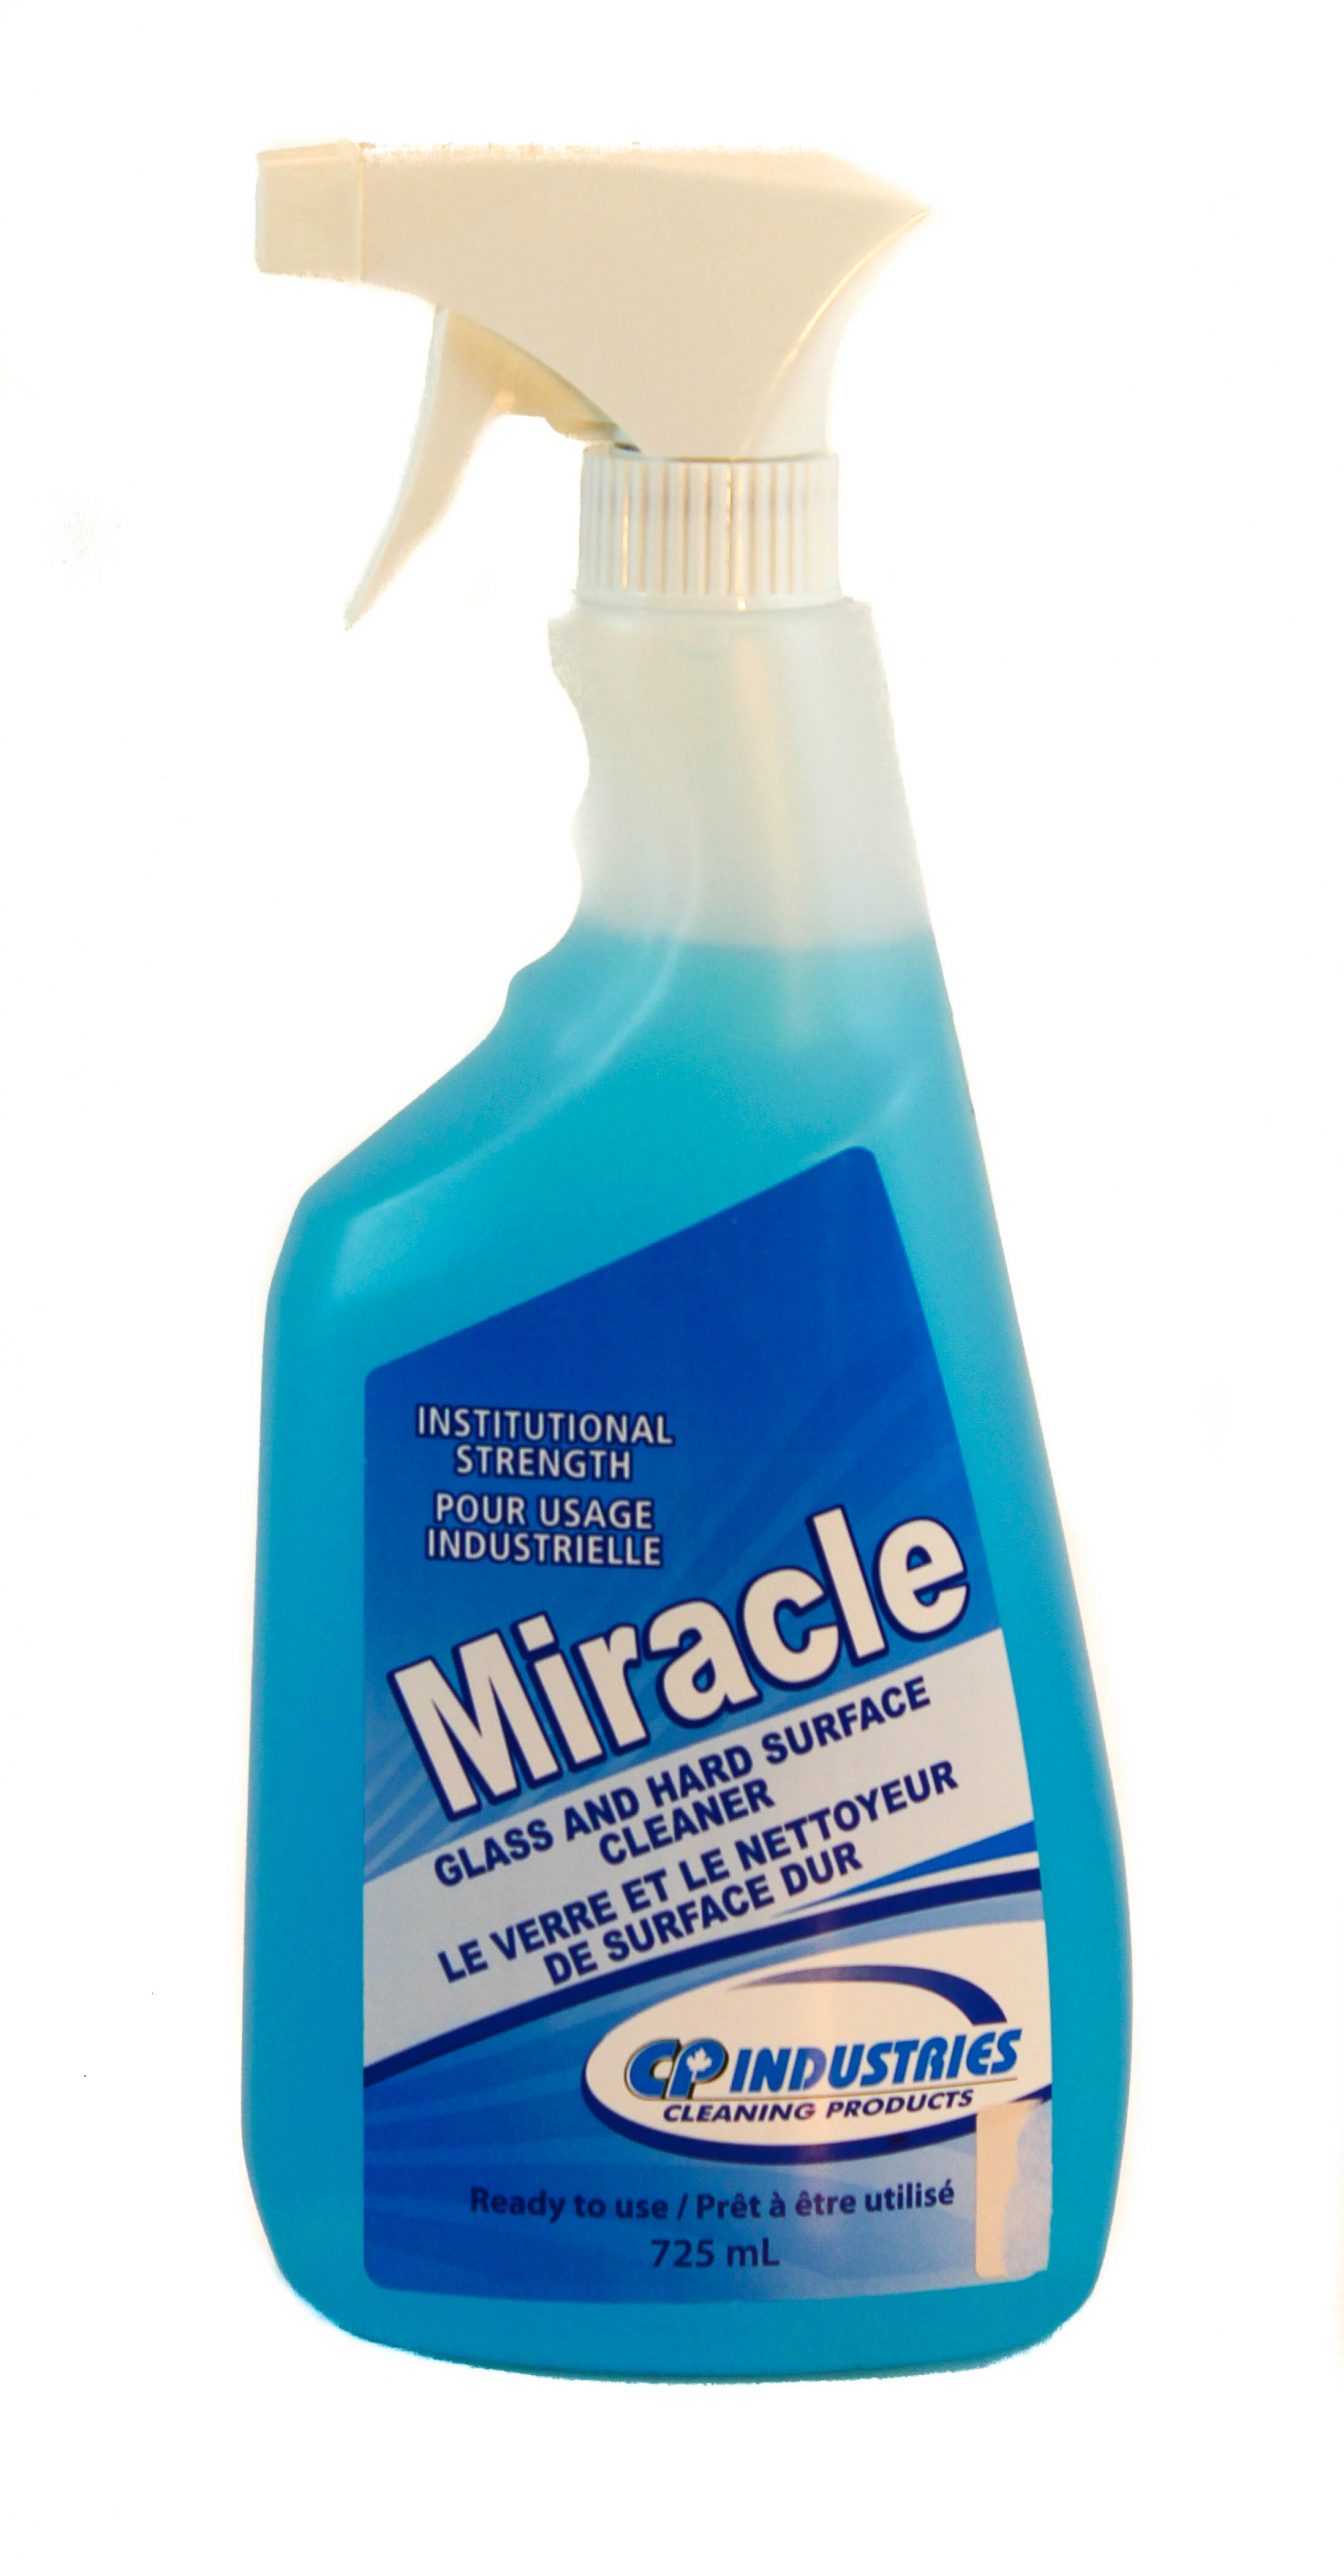 CP Industries Miracle institutional strength glass and hard surface cleaner